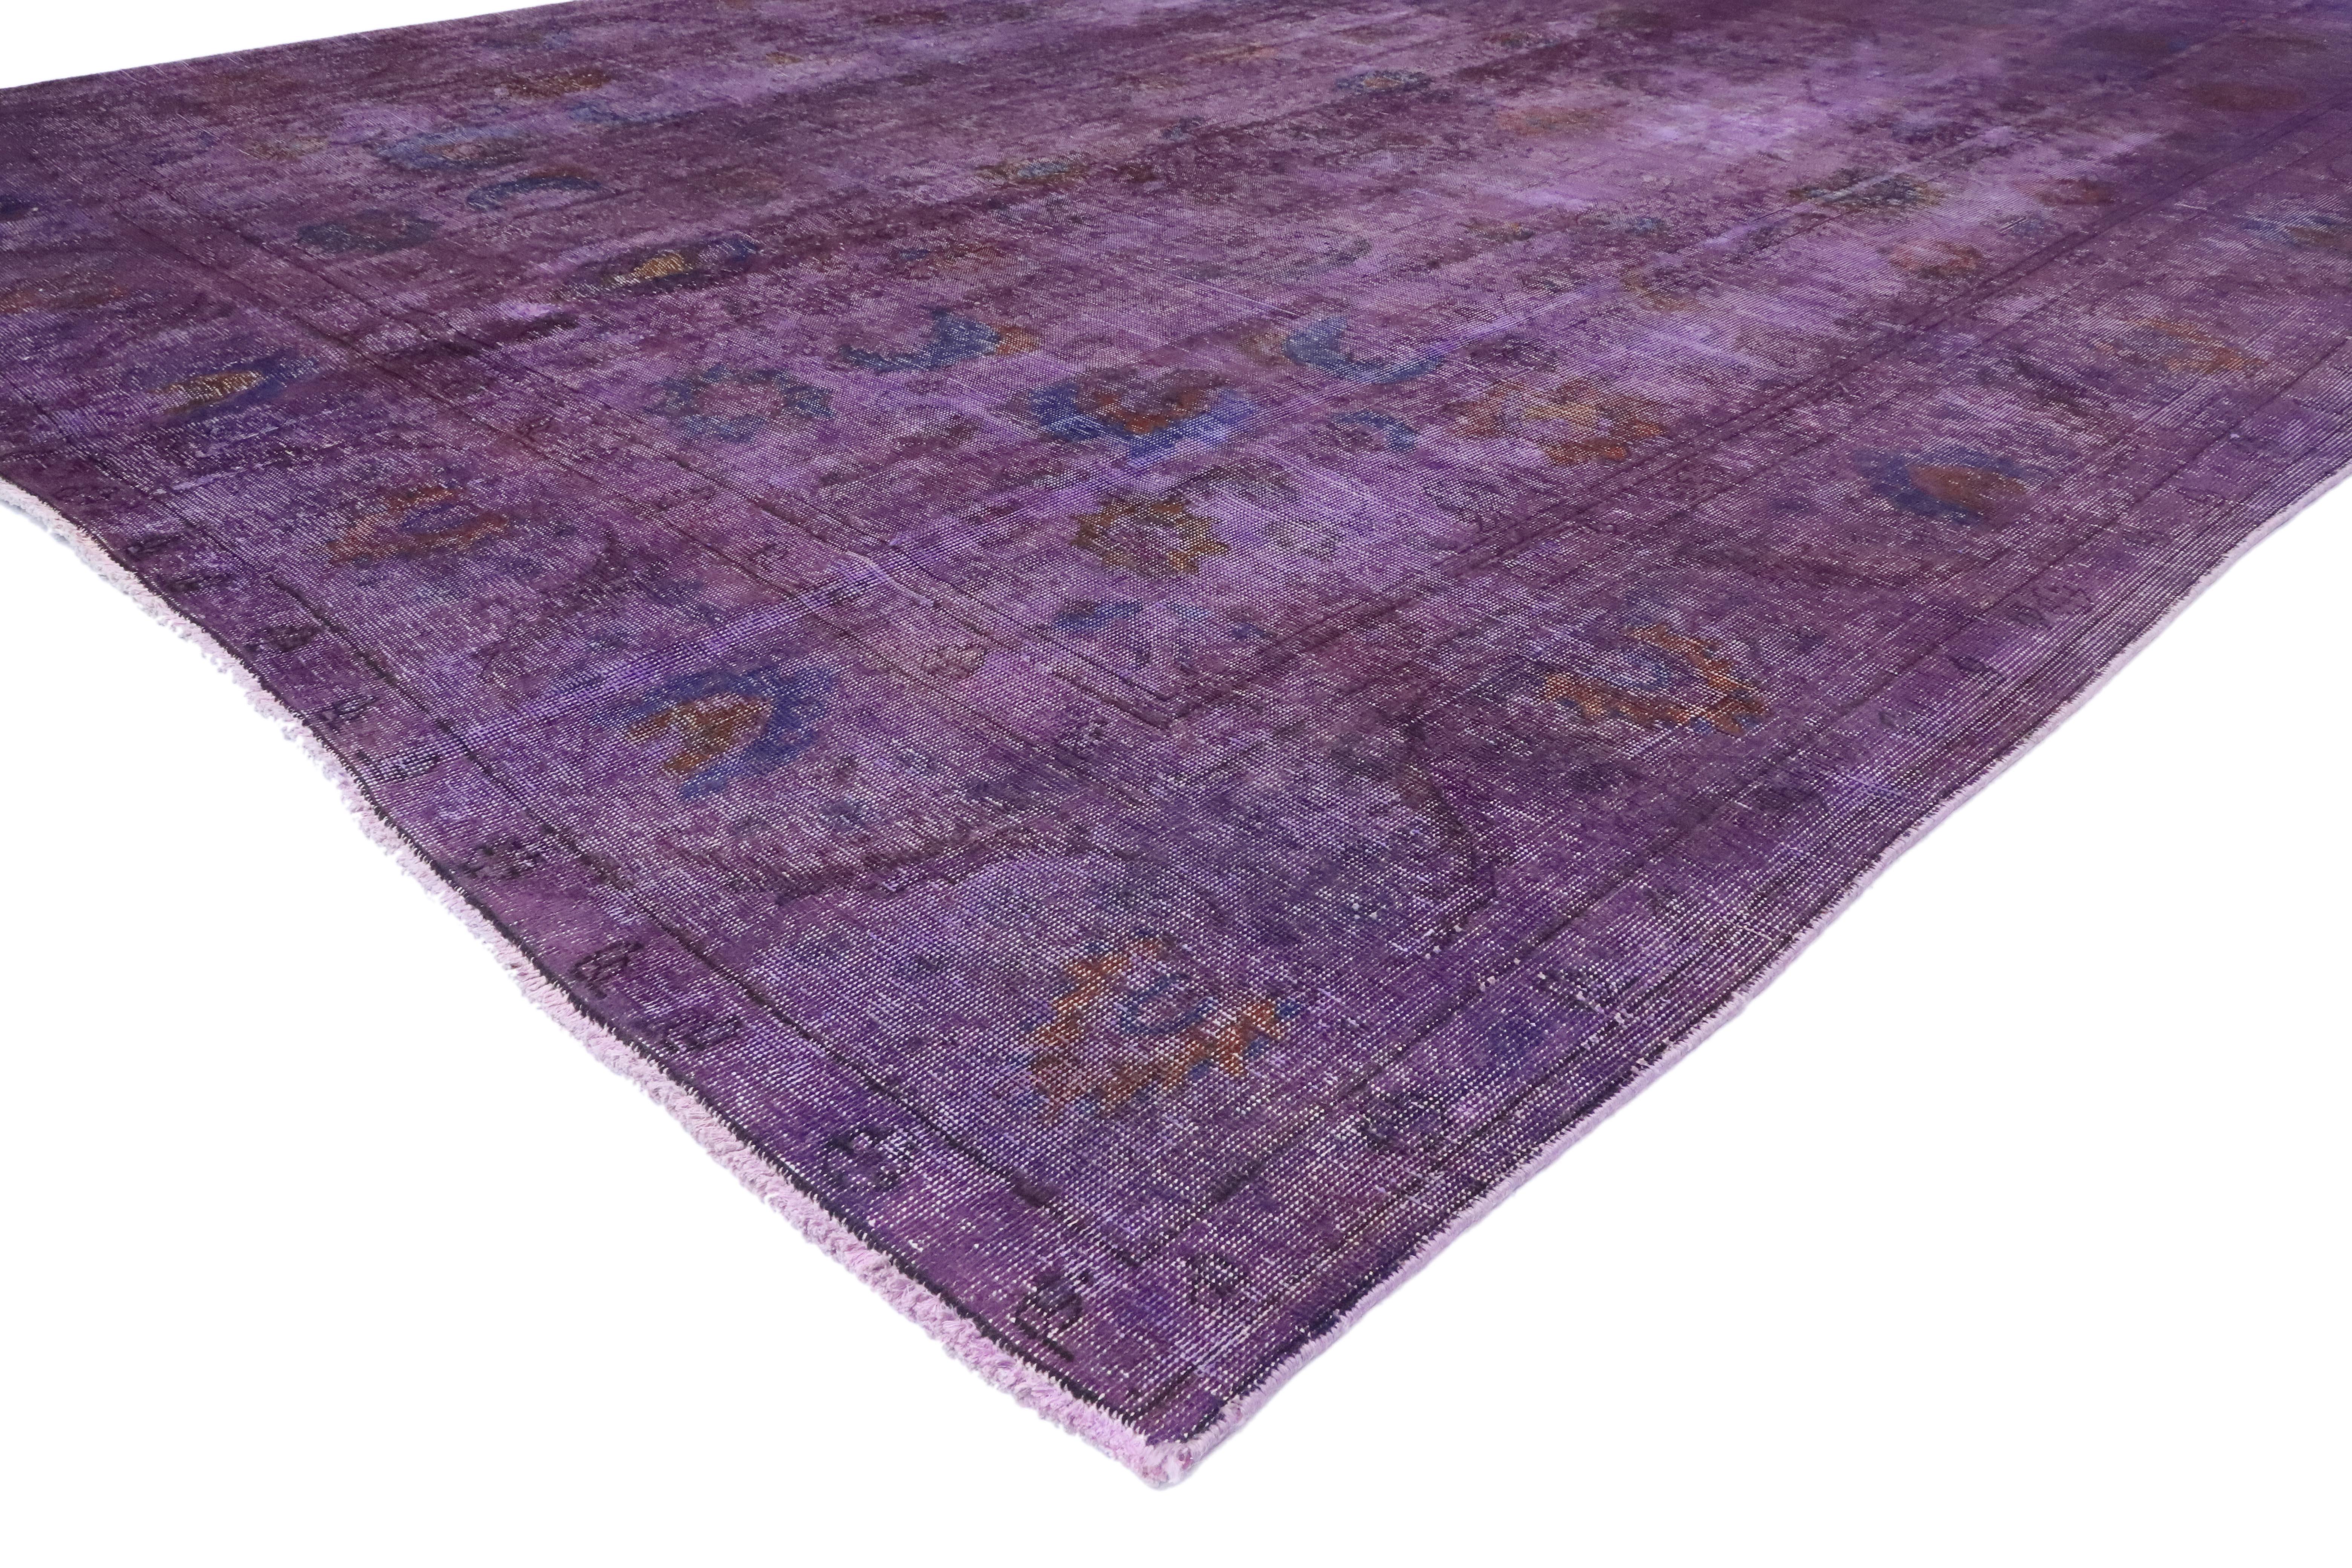 20th Century Distressed Overdyed Purple Persian Rug with PostModern Memphis Style